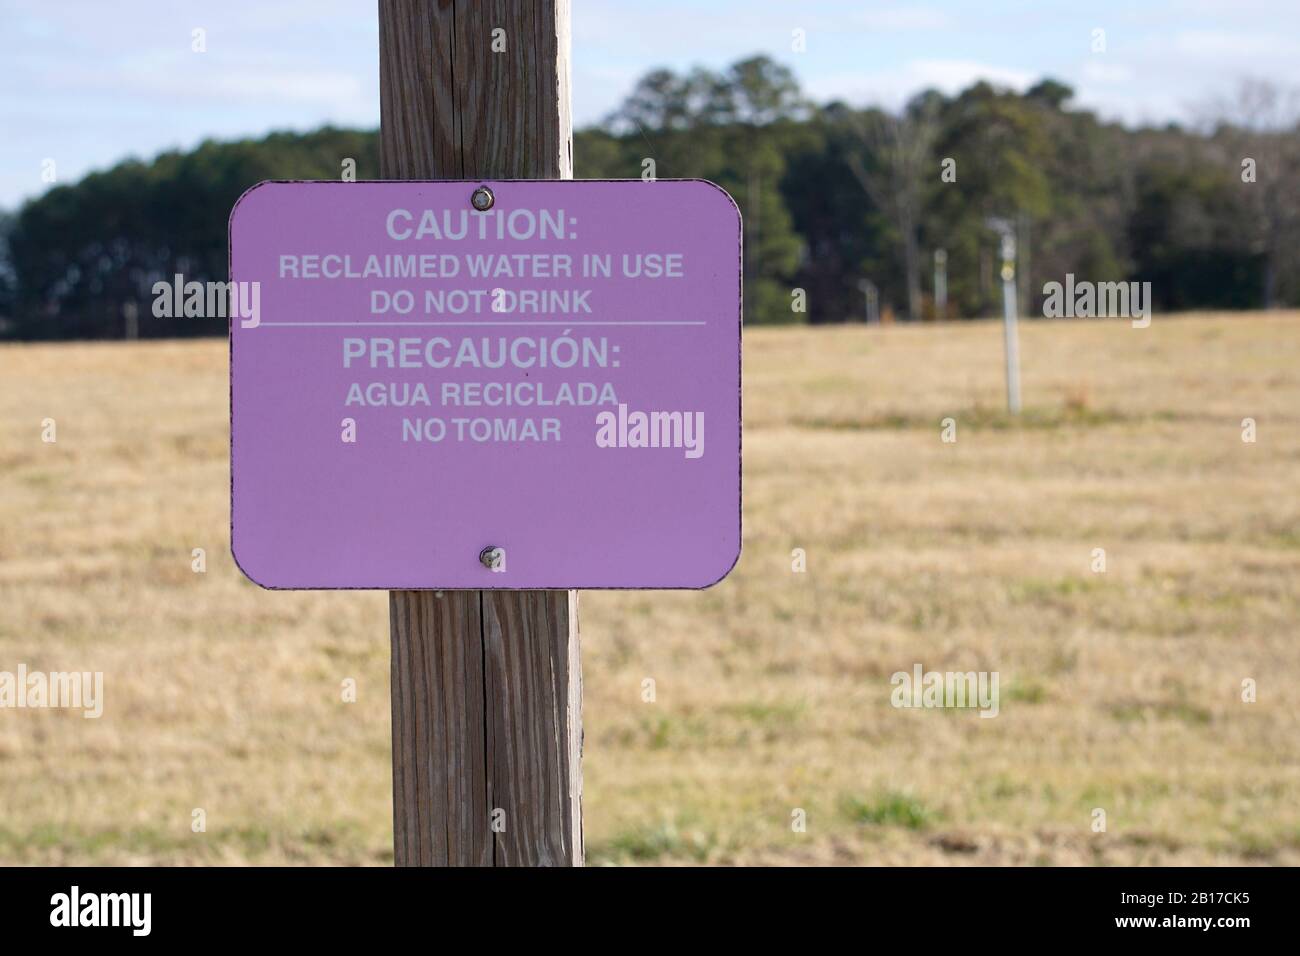 Caution sign - reclaimed water in use Stock Photo